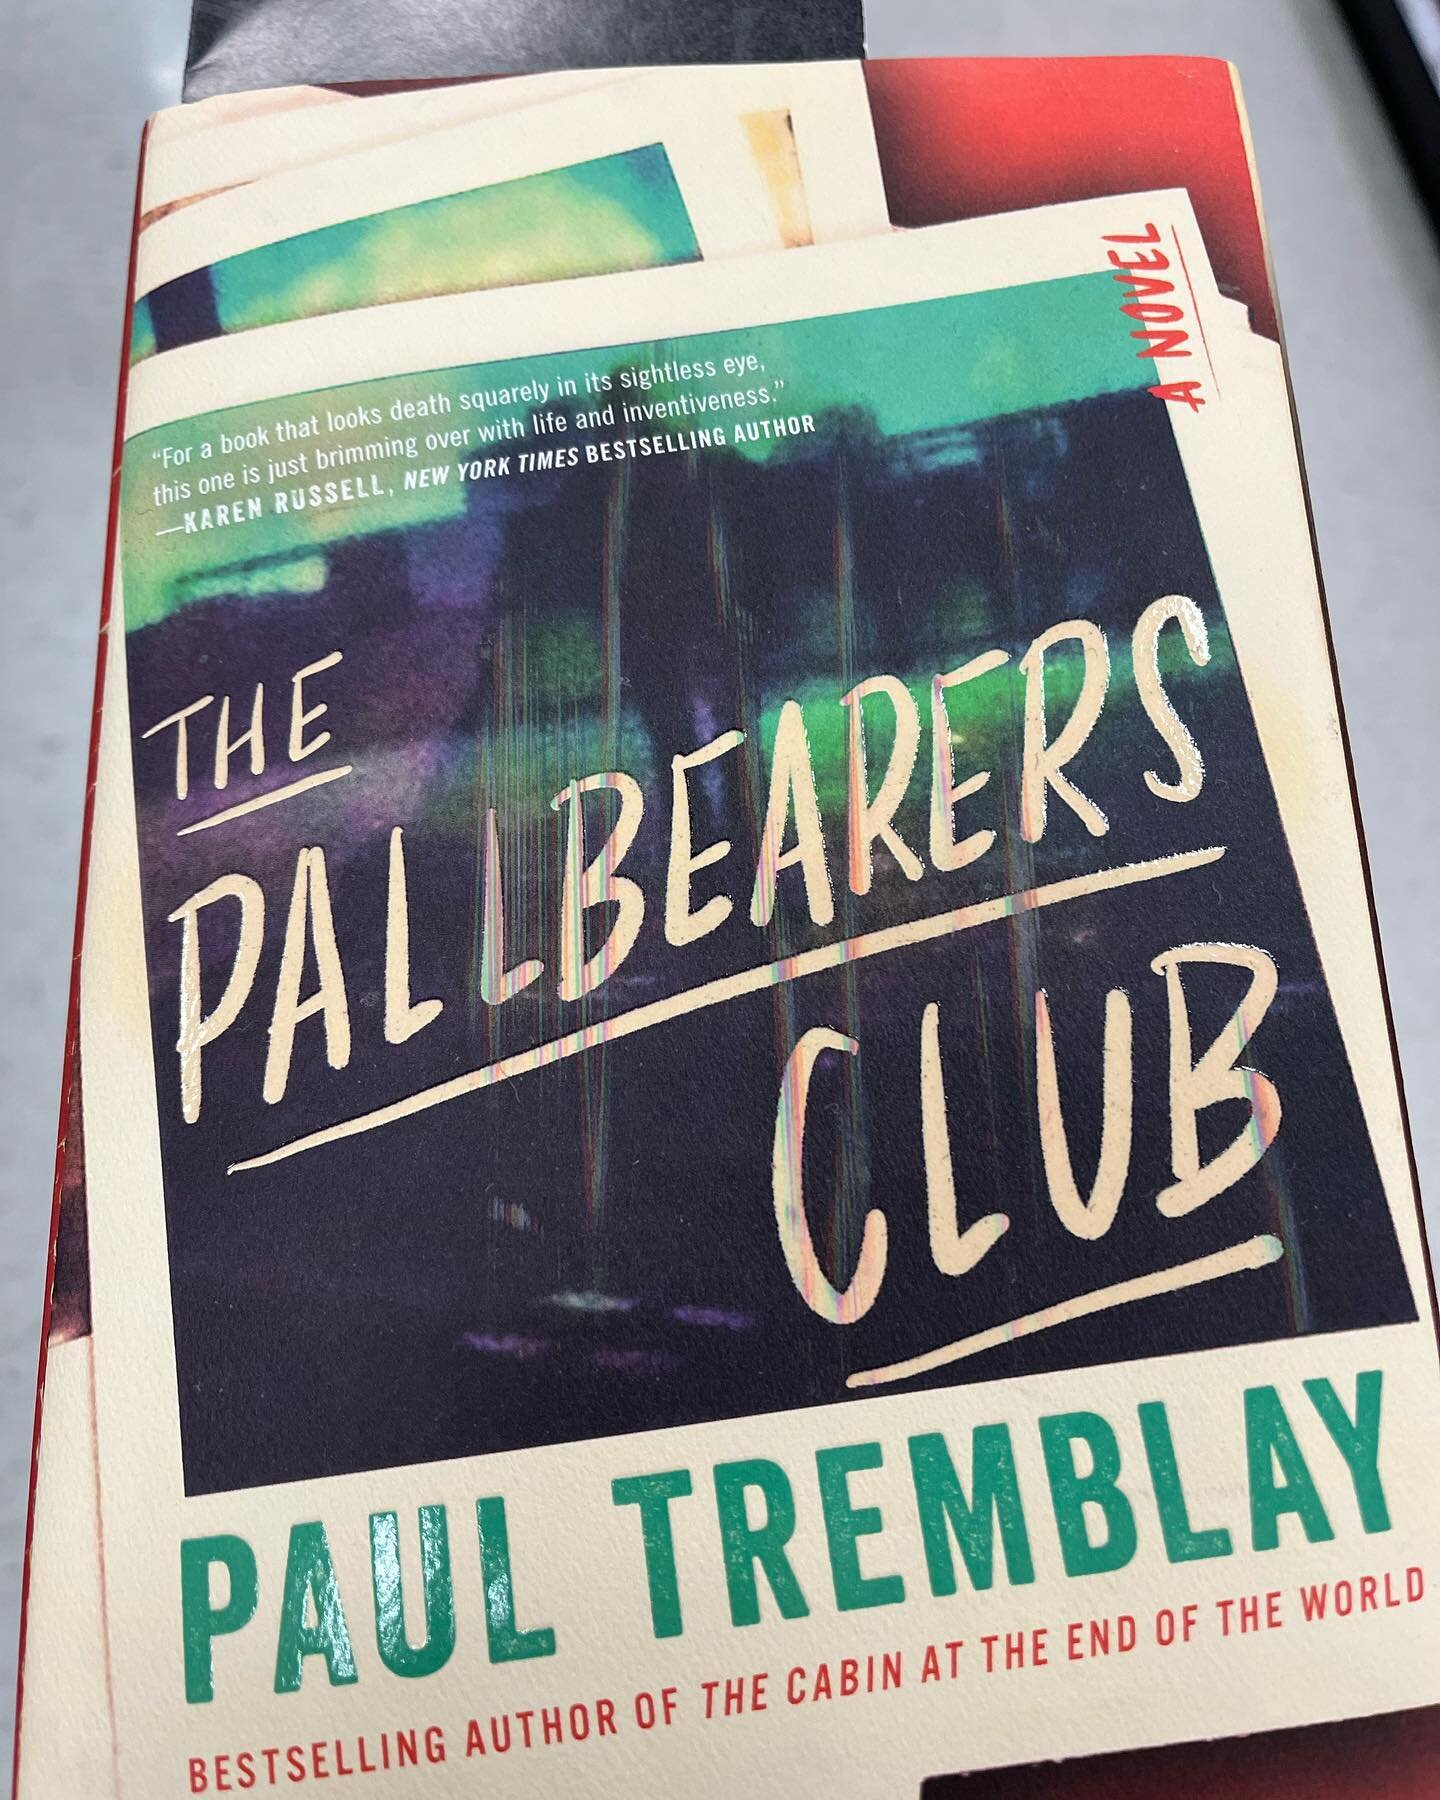 Tonight&rsquo;s in-line-at-the-CVS reading - The Pallbearers Club, @paulgtremblay. The pharmacy. Always a good place to laugh out loud.